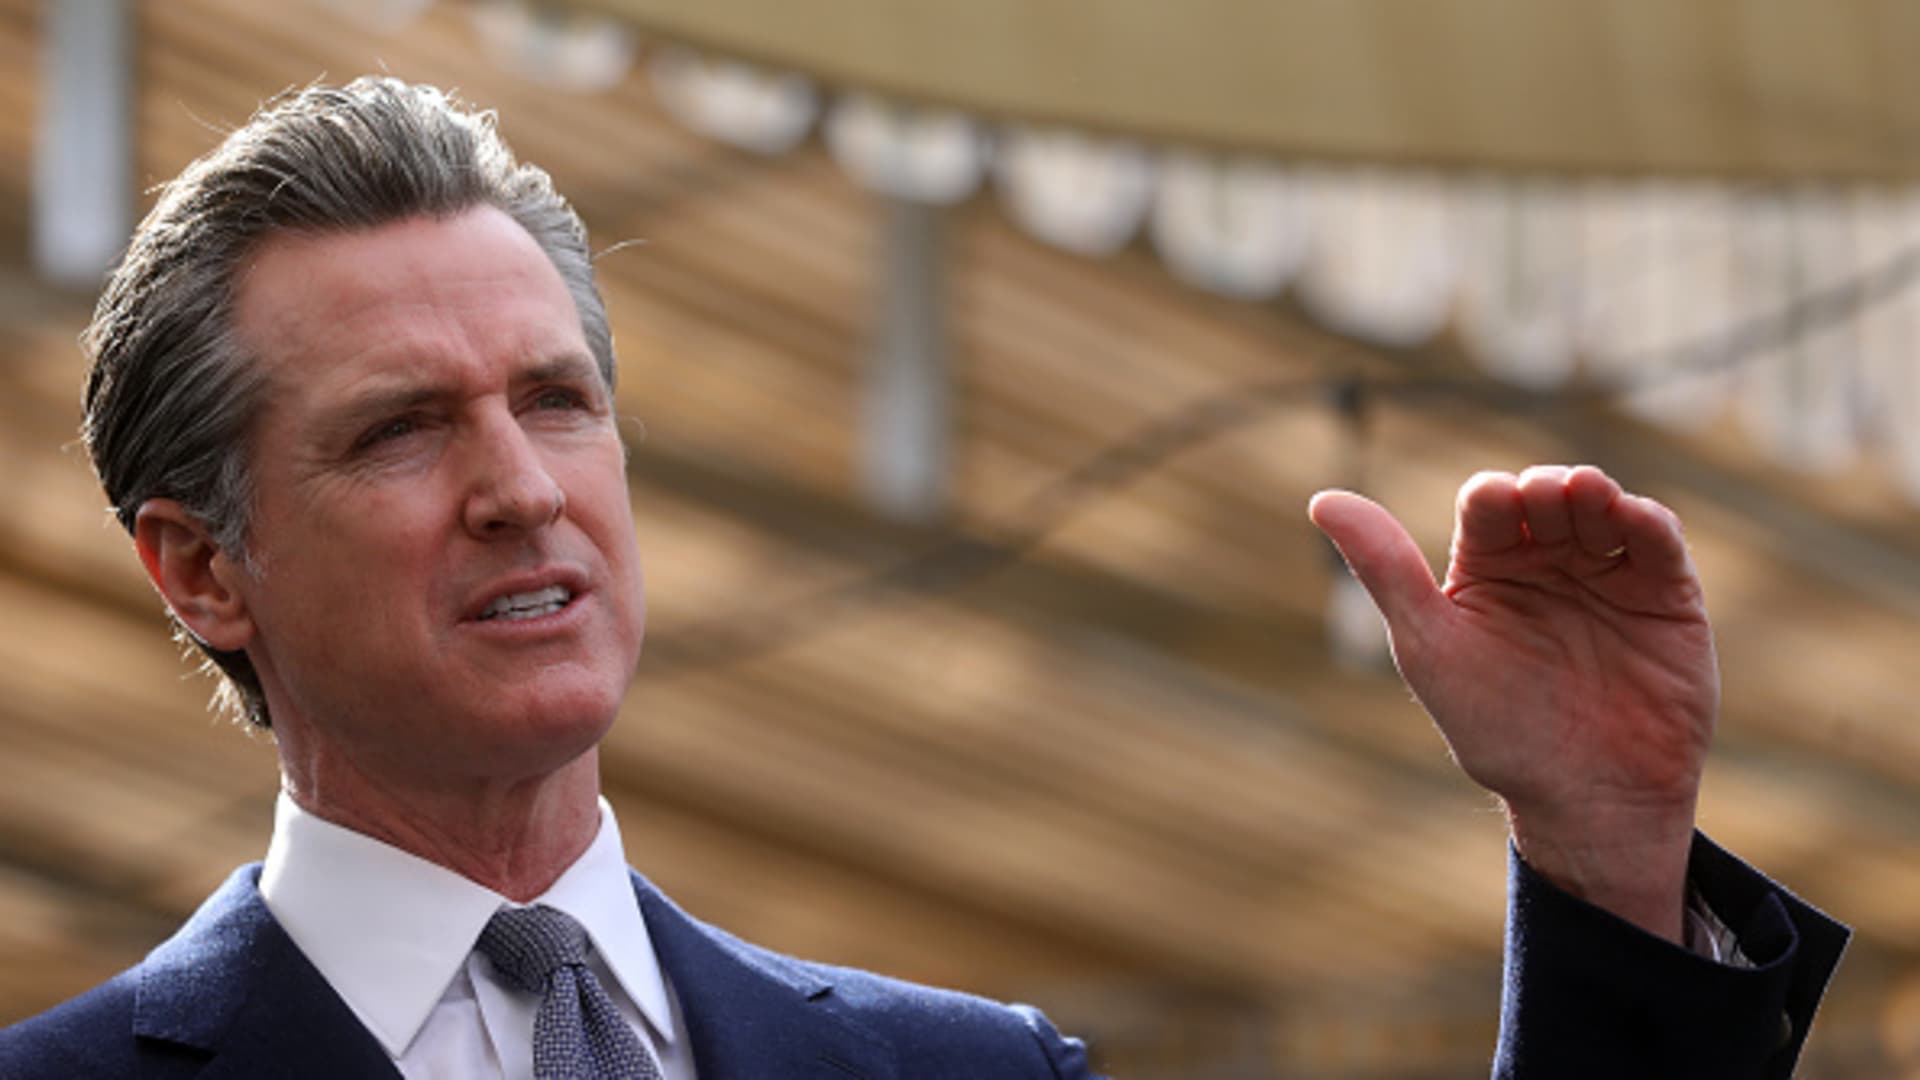 California Governor Gavin Newsom speaks at a press conference in Oakland, California, on Wednesday, on Feb. 9, 2022.